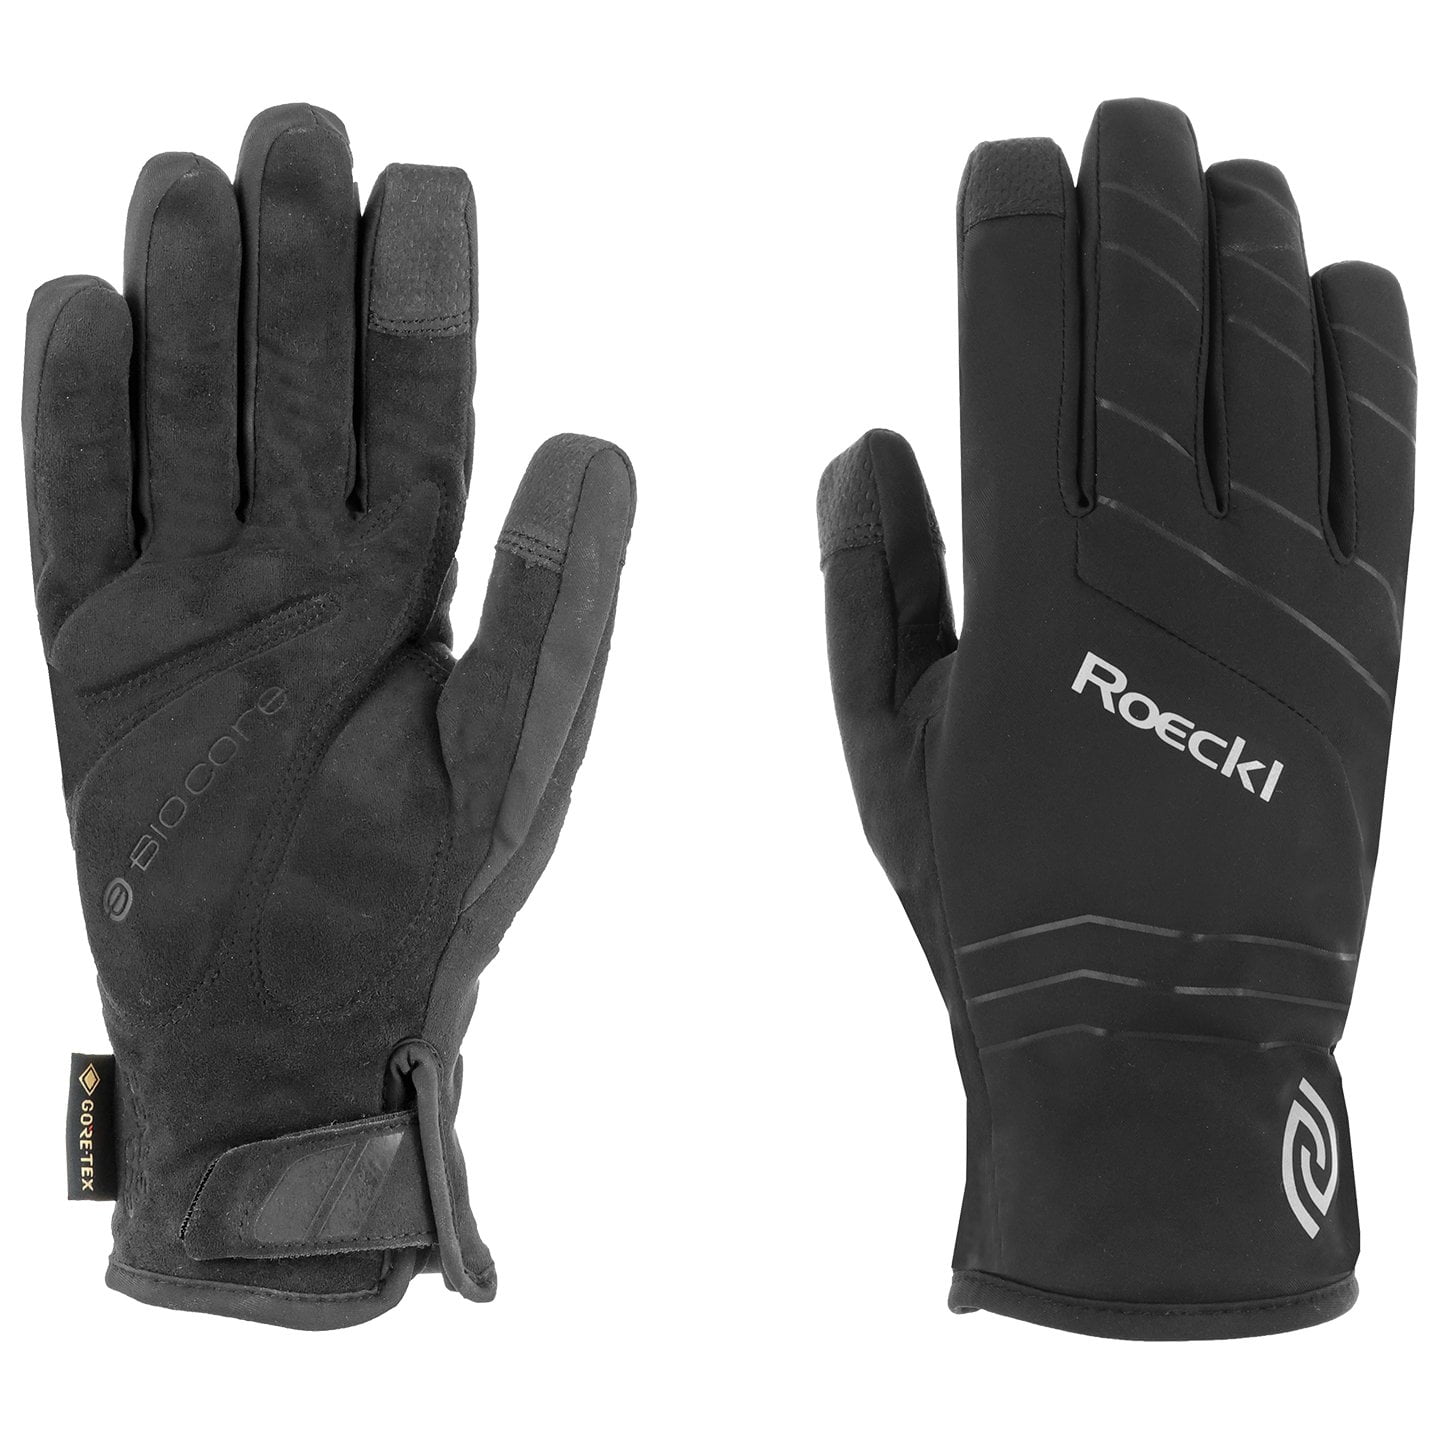 ROECKL Rosegg GTX Winter Gloves Winter Cycling Gloves, for men, size 9,5, Bike gloves, Cycling wear